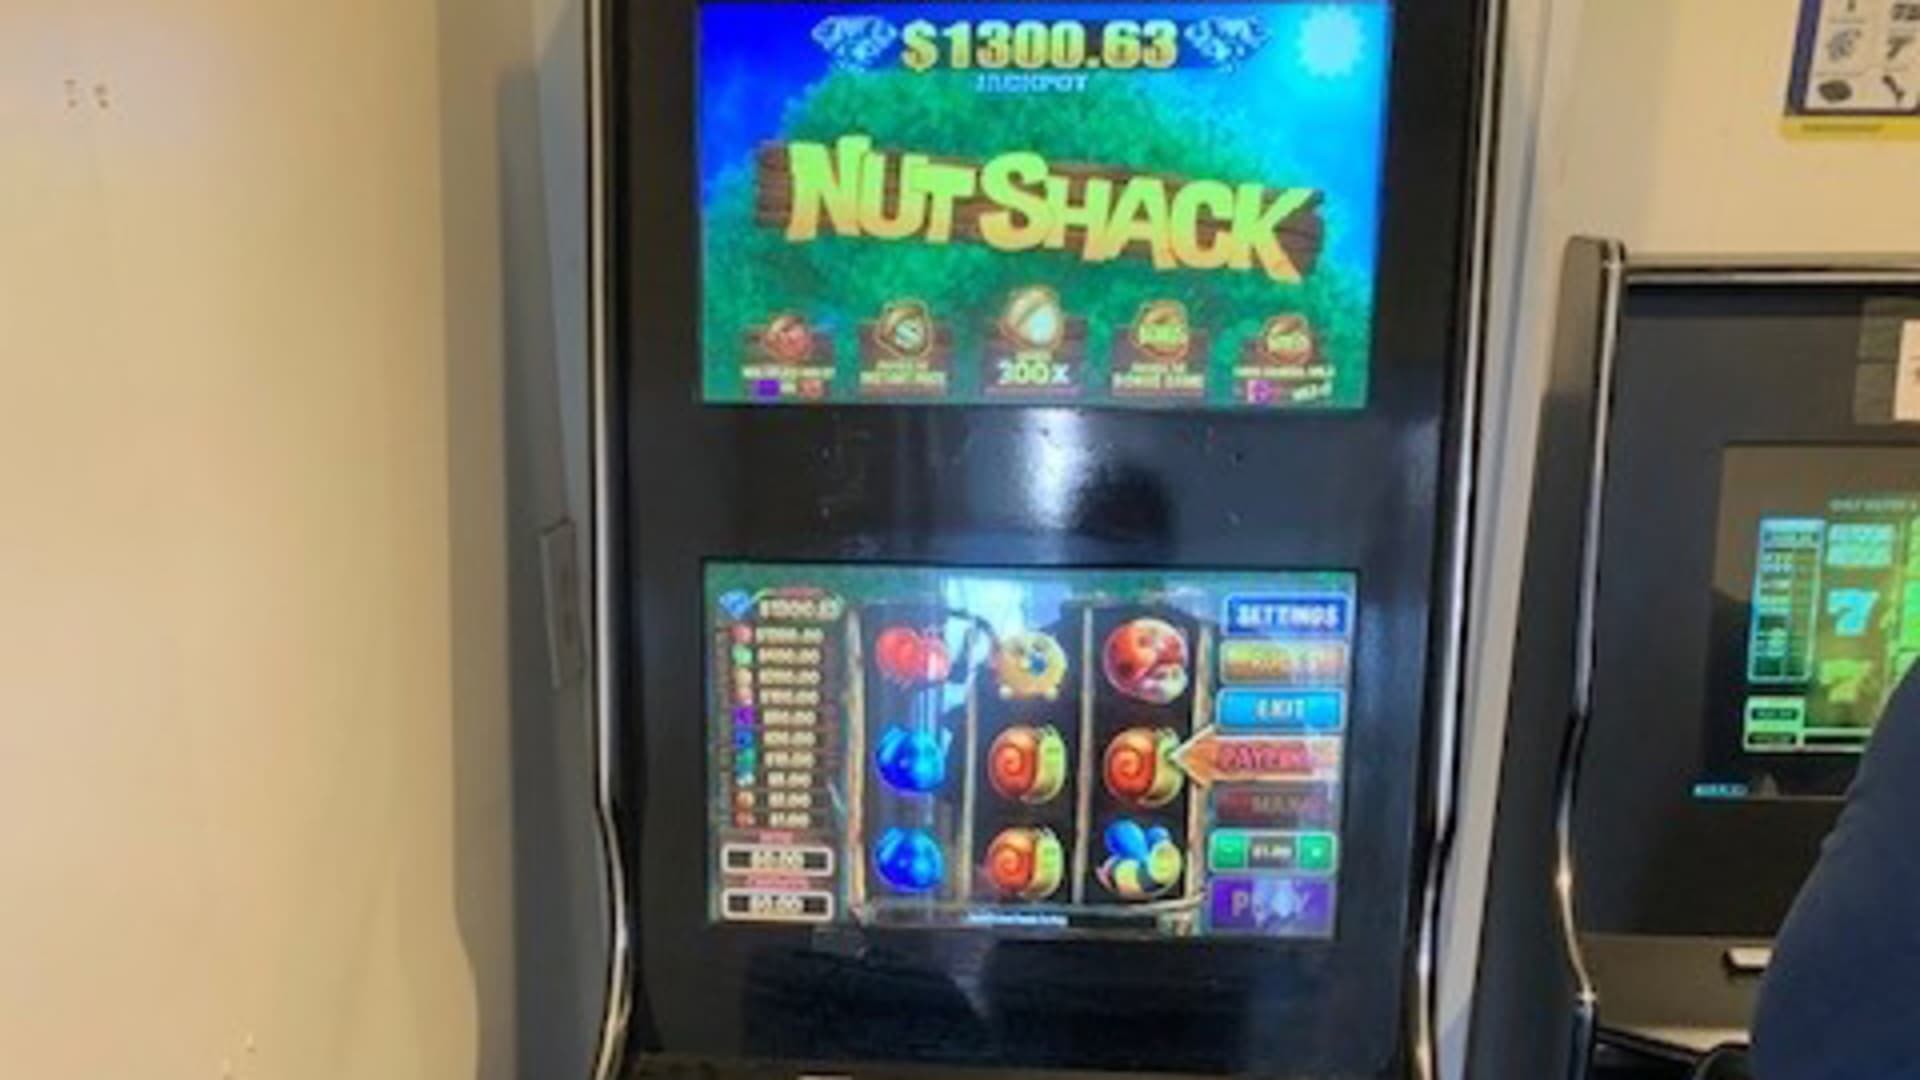 The casino industry is also asking law enforcement to crackdown on unlicensed gambling machines, often placed in taverns, mini-marts and gas stations.